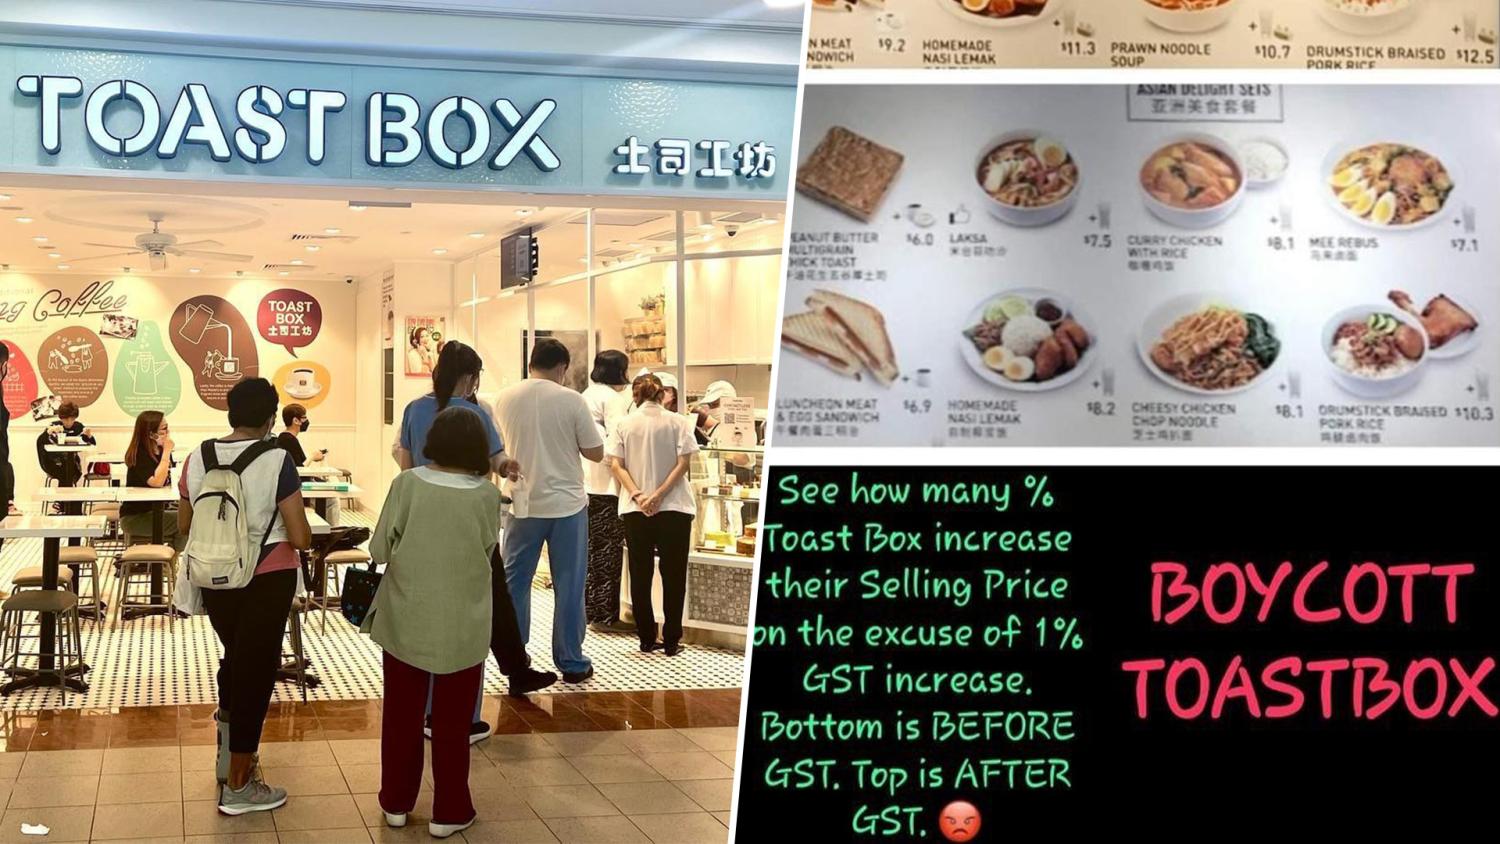 toast-box-responds-to-allegations-of-steep-price-hike-montage.jpg